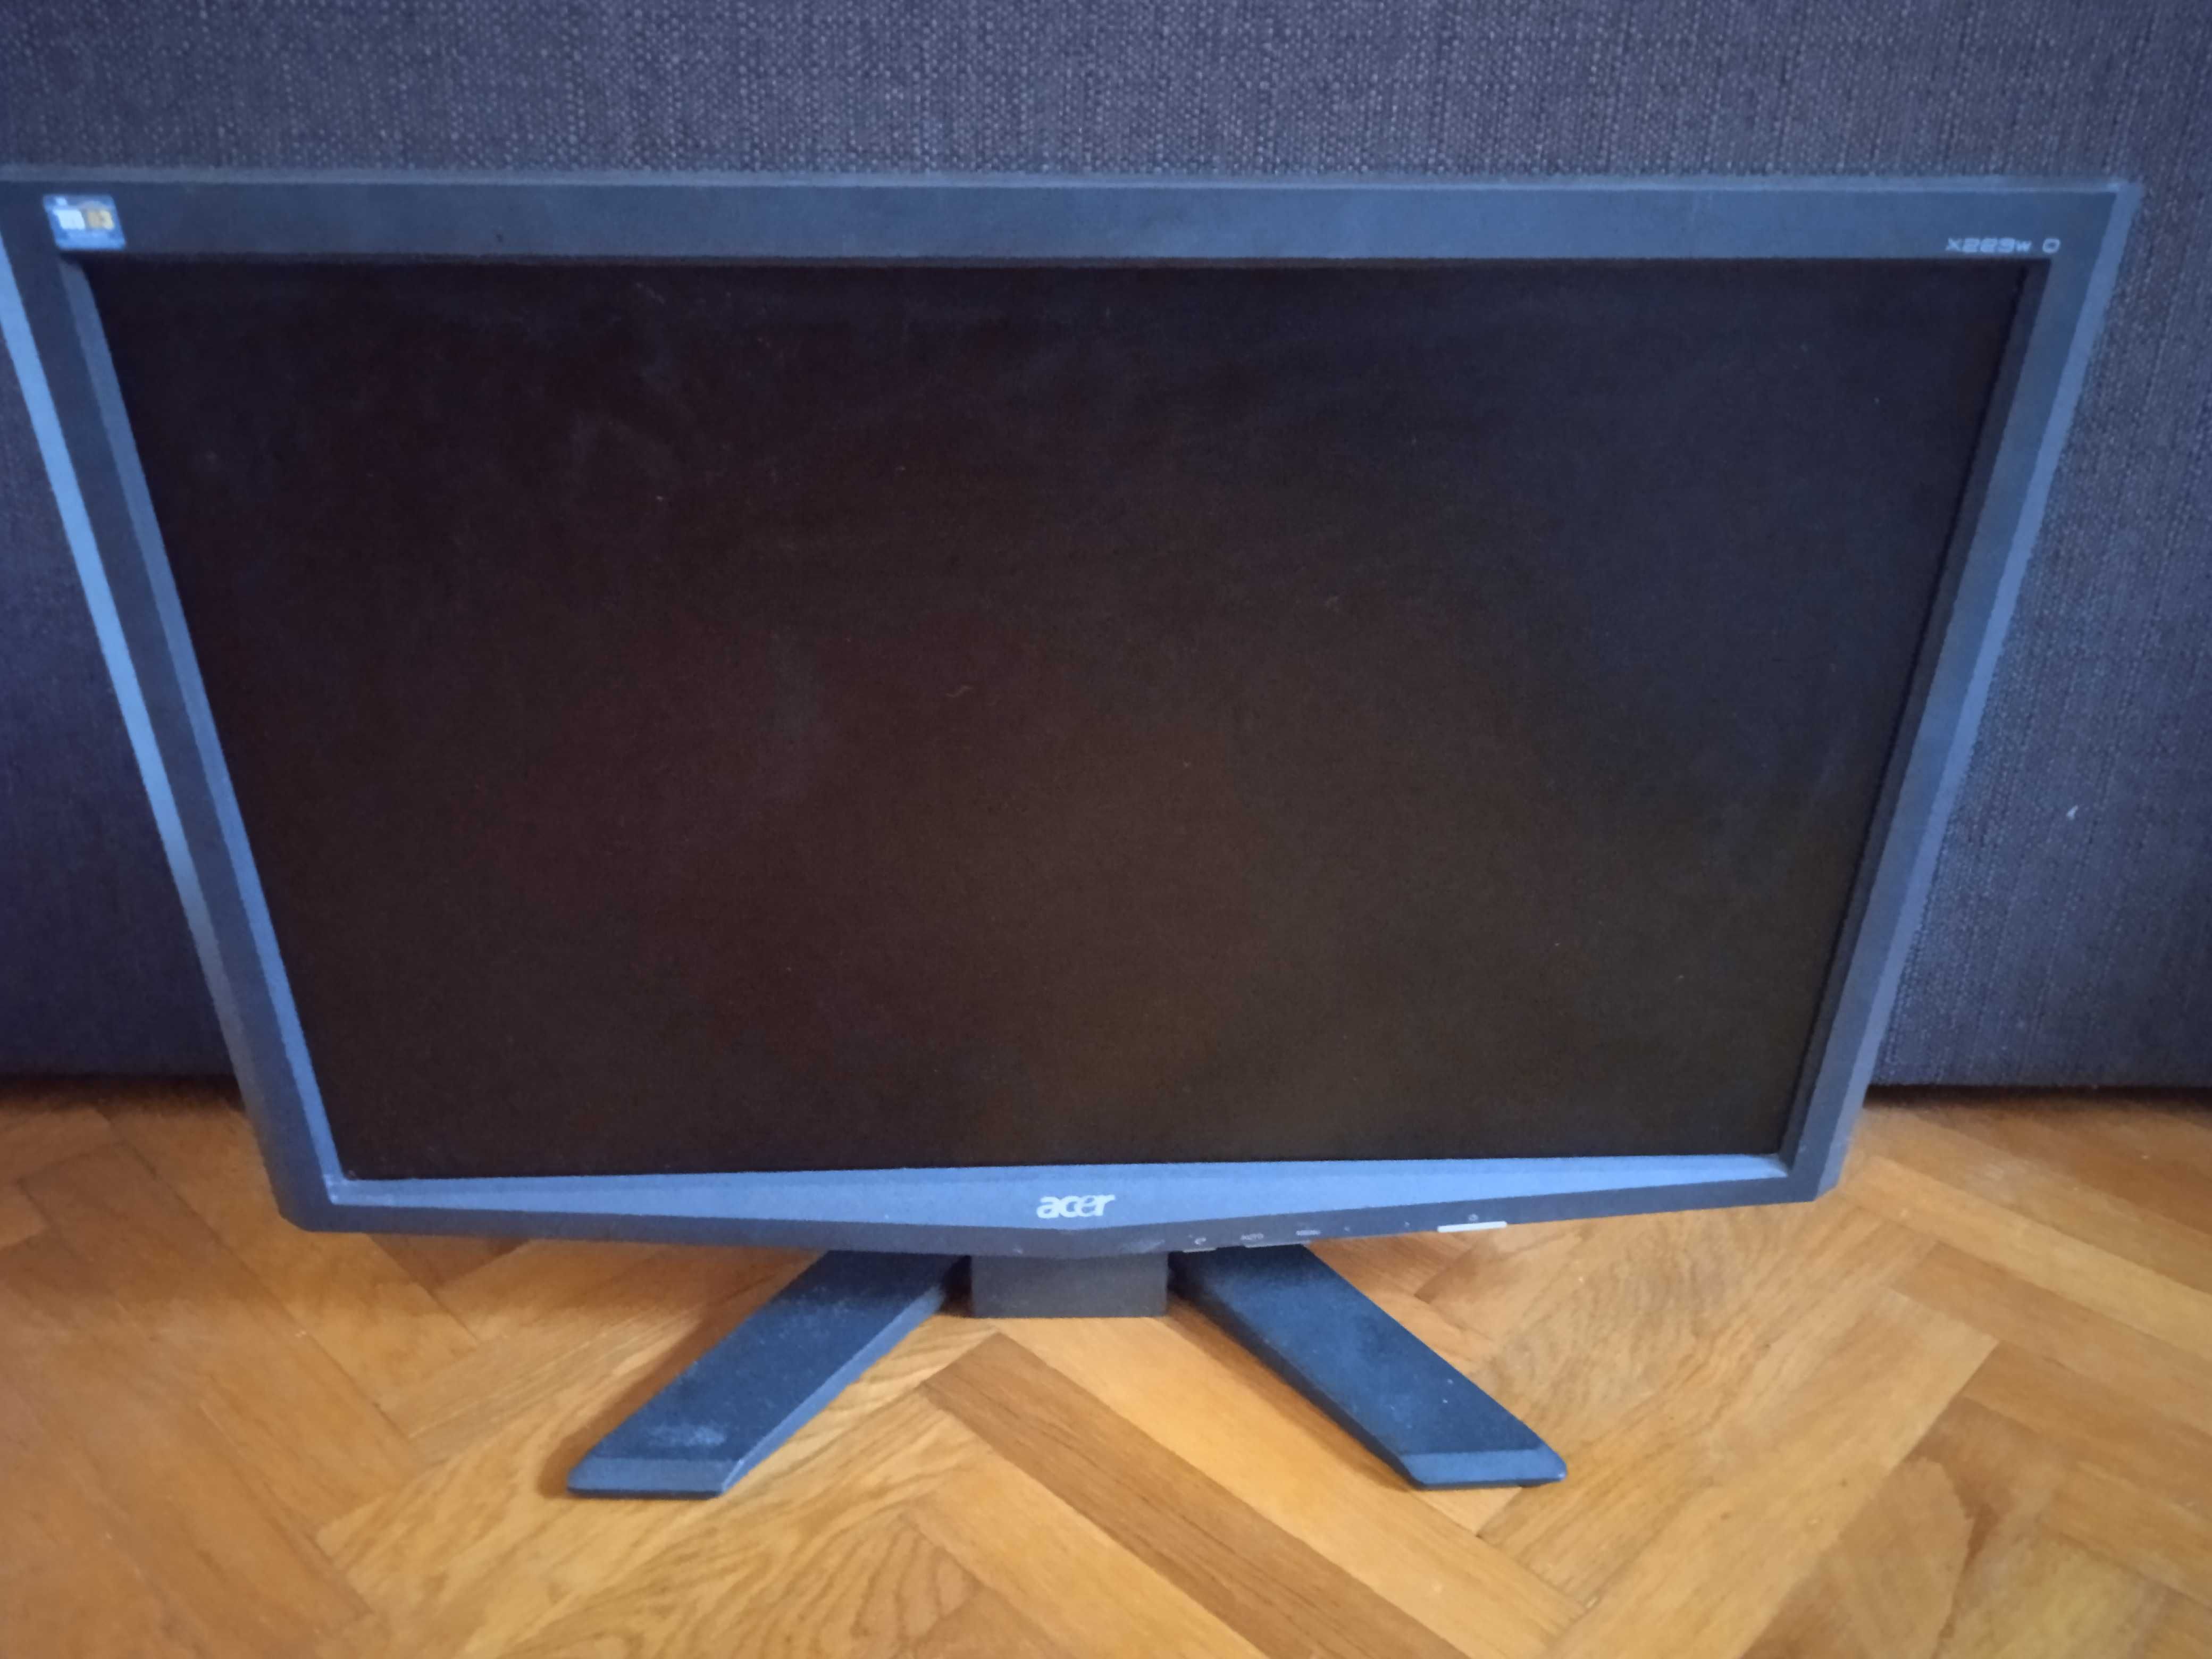 Vand Monitor Acer X223w Q defect